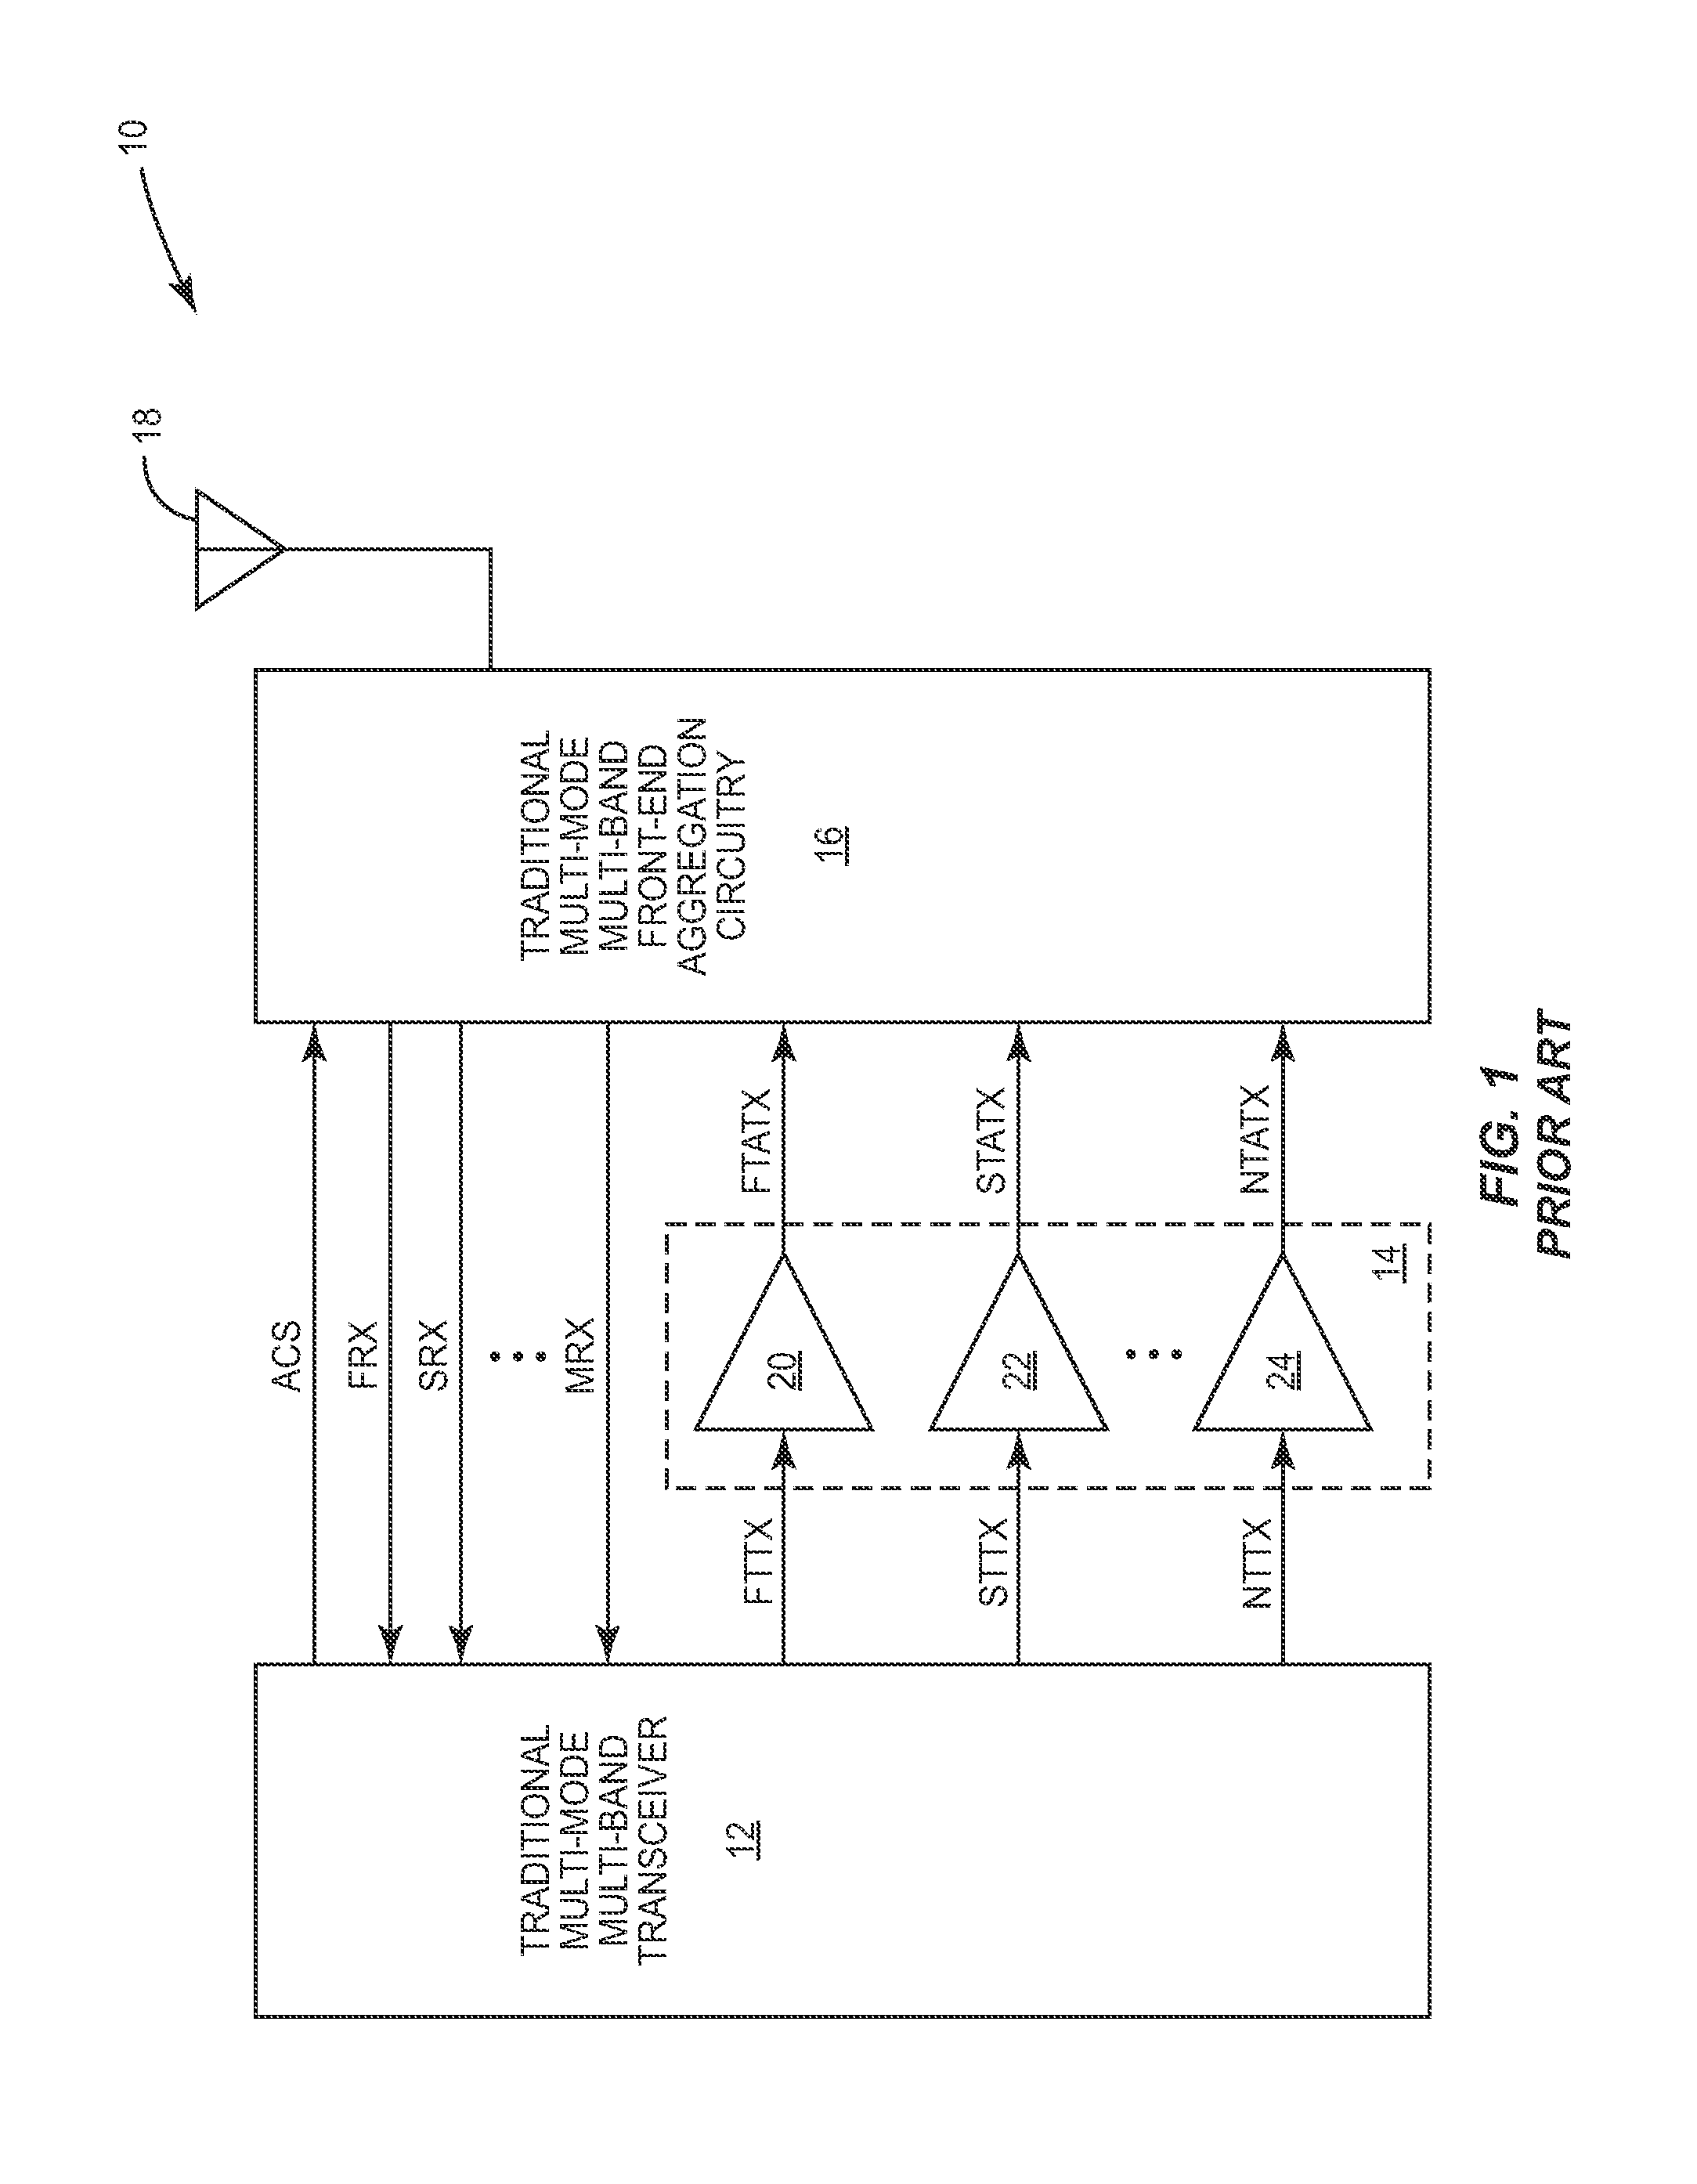 Direct current (DC)-dc converter having a multi-stage output filter